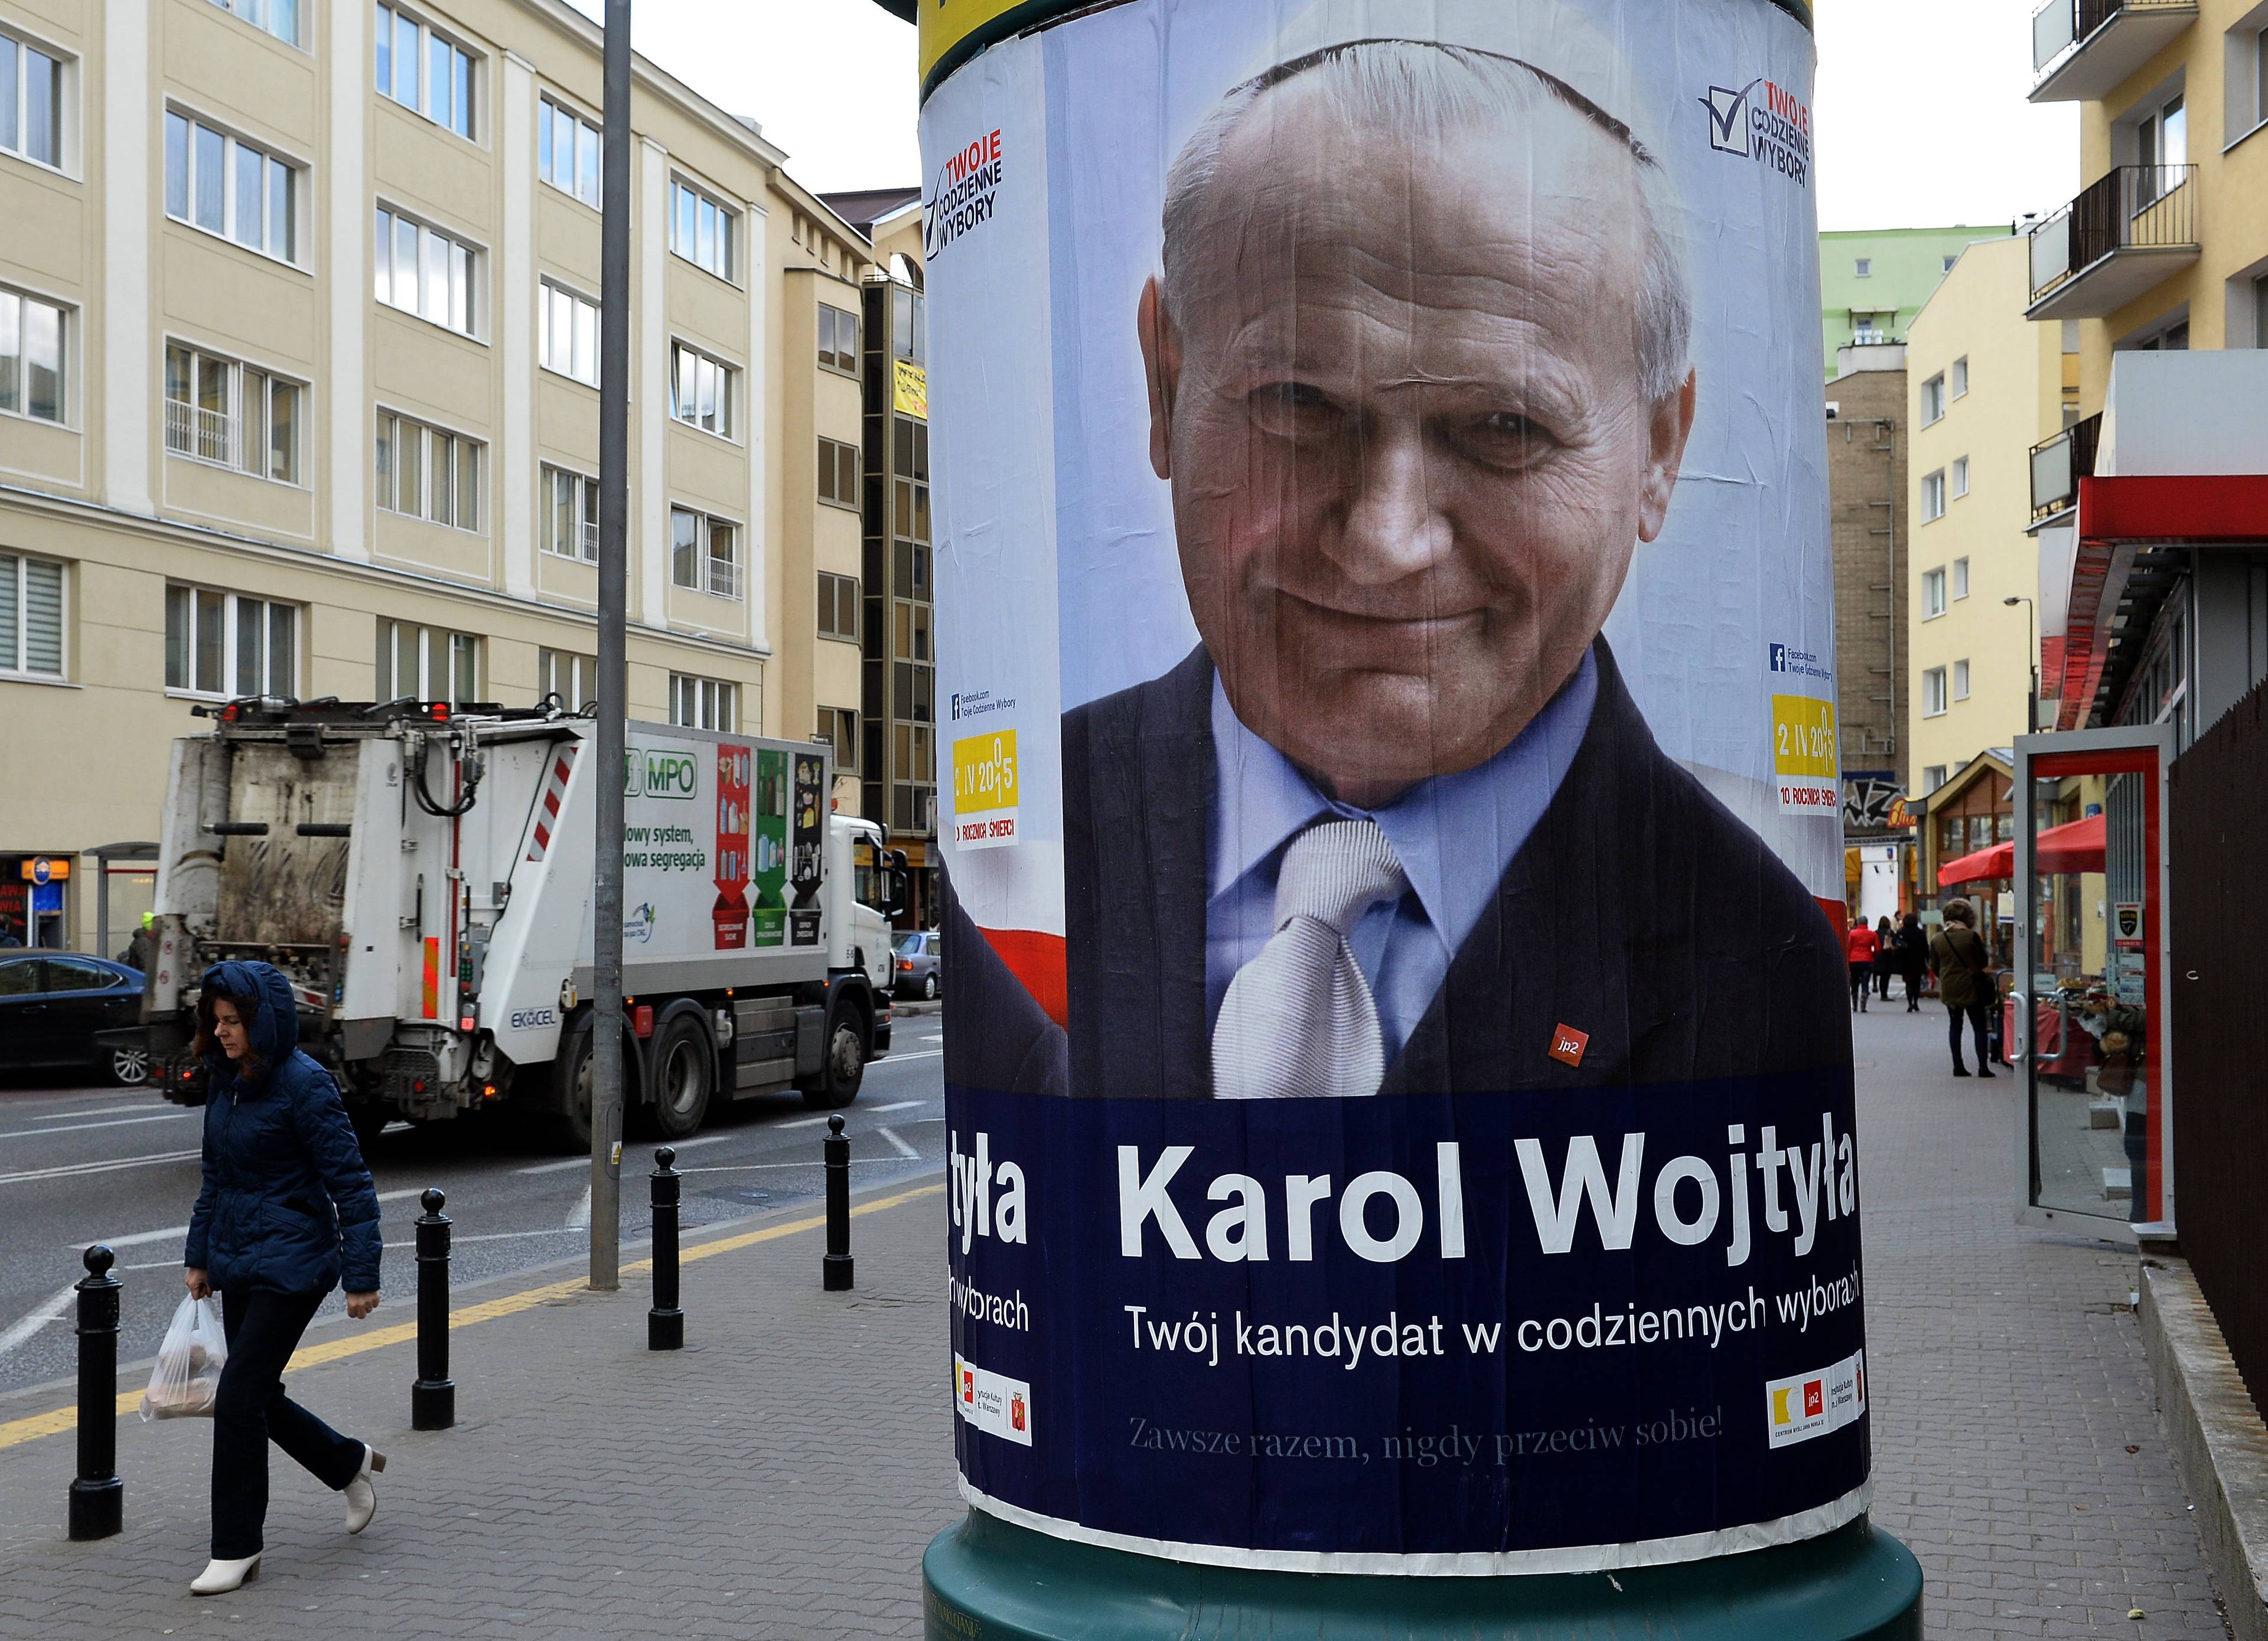 A poster of Saint John Paul II in downtown Warsaw on March 30, 2015 ahead of the upcoming 10th anniversary of the death of the Polish-born pontiff urging Poles to make good choices and unite. The poster was created by the Polish capital's city council but its officials insist the poster is apolitical. Poles vote in presidential elections in May and parliamentary elections in October. AFP PHOTO/JANEK SKARZYNSKI